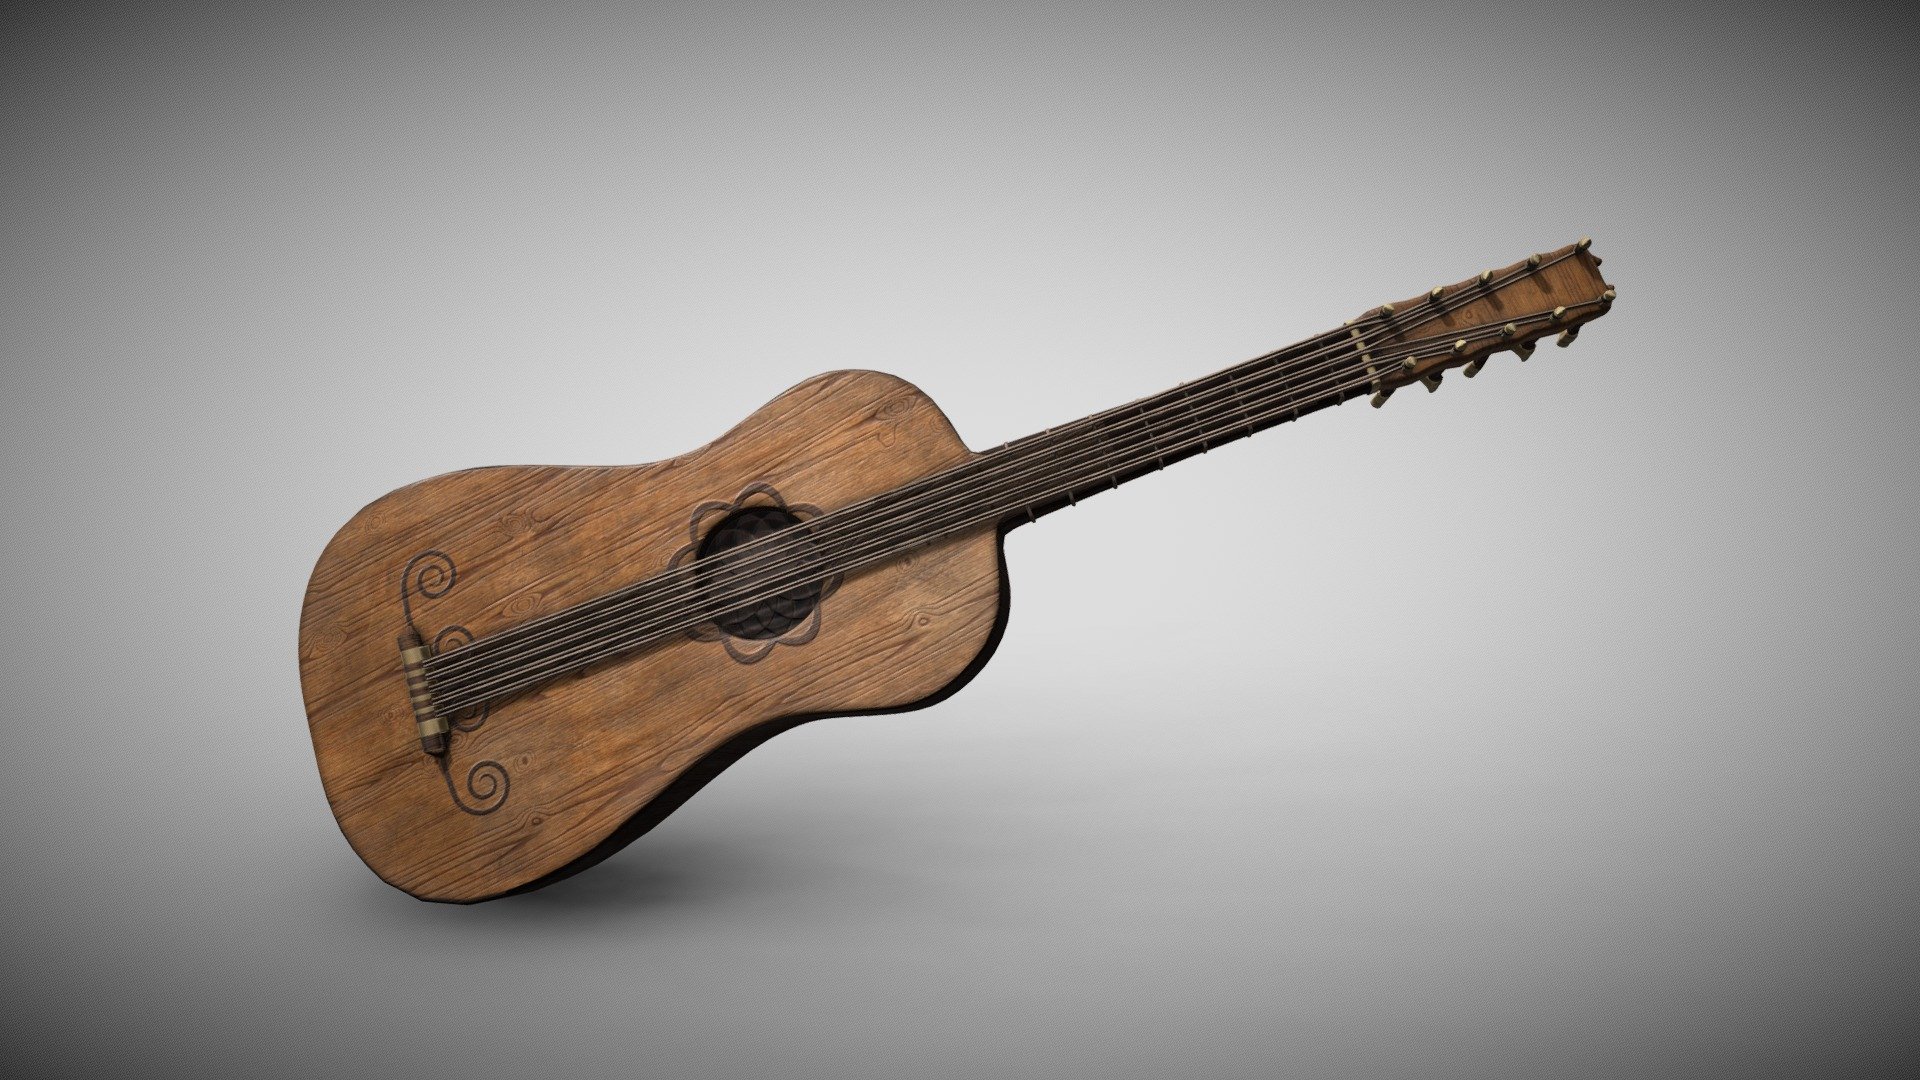 Malawi speer doel Baroque Guitar - 17th Century Europe - Buy Royalty Free 3D model by Kingy  (@kingy) [8fa605c]